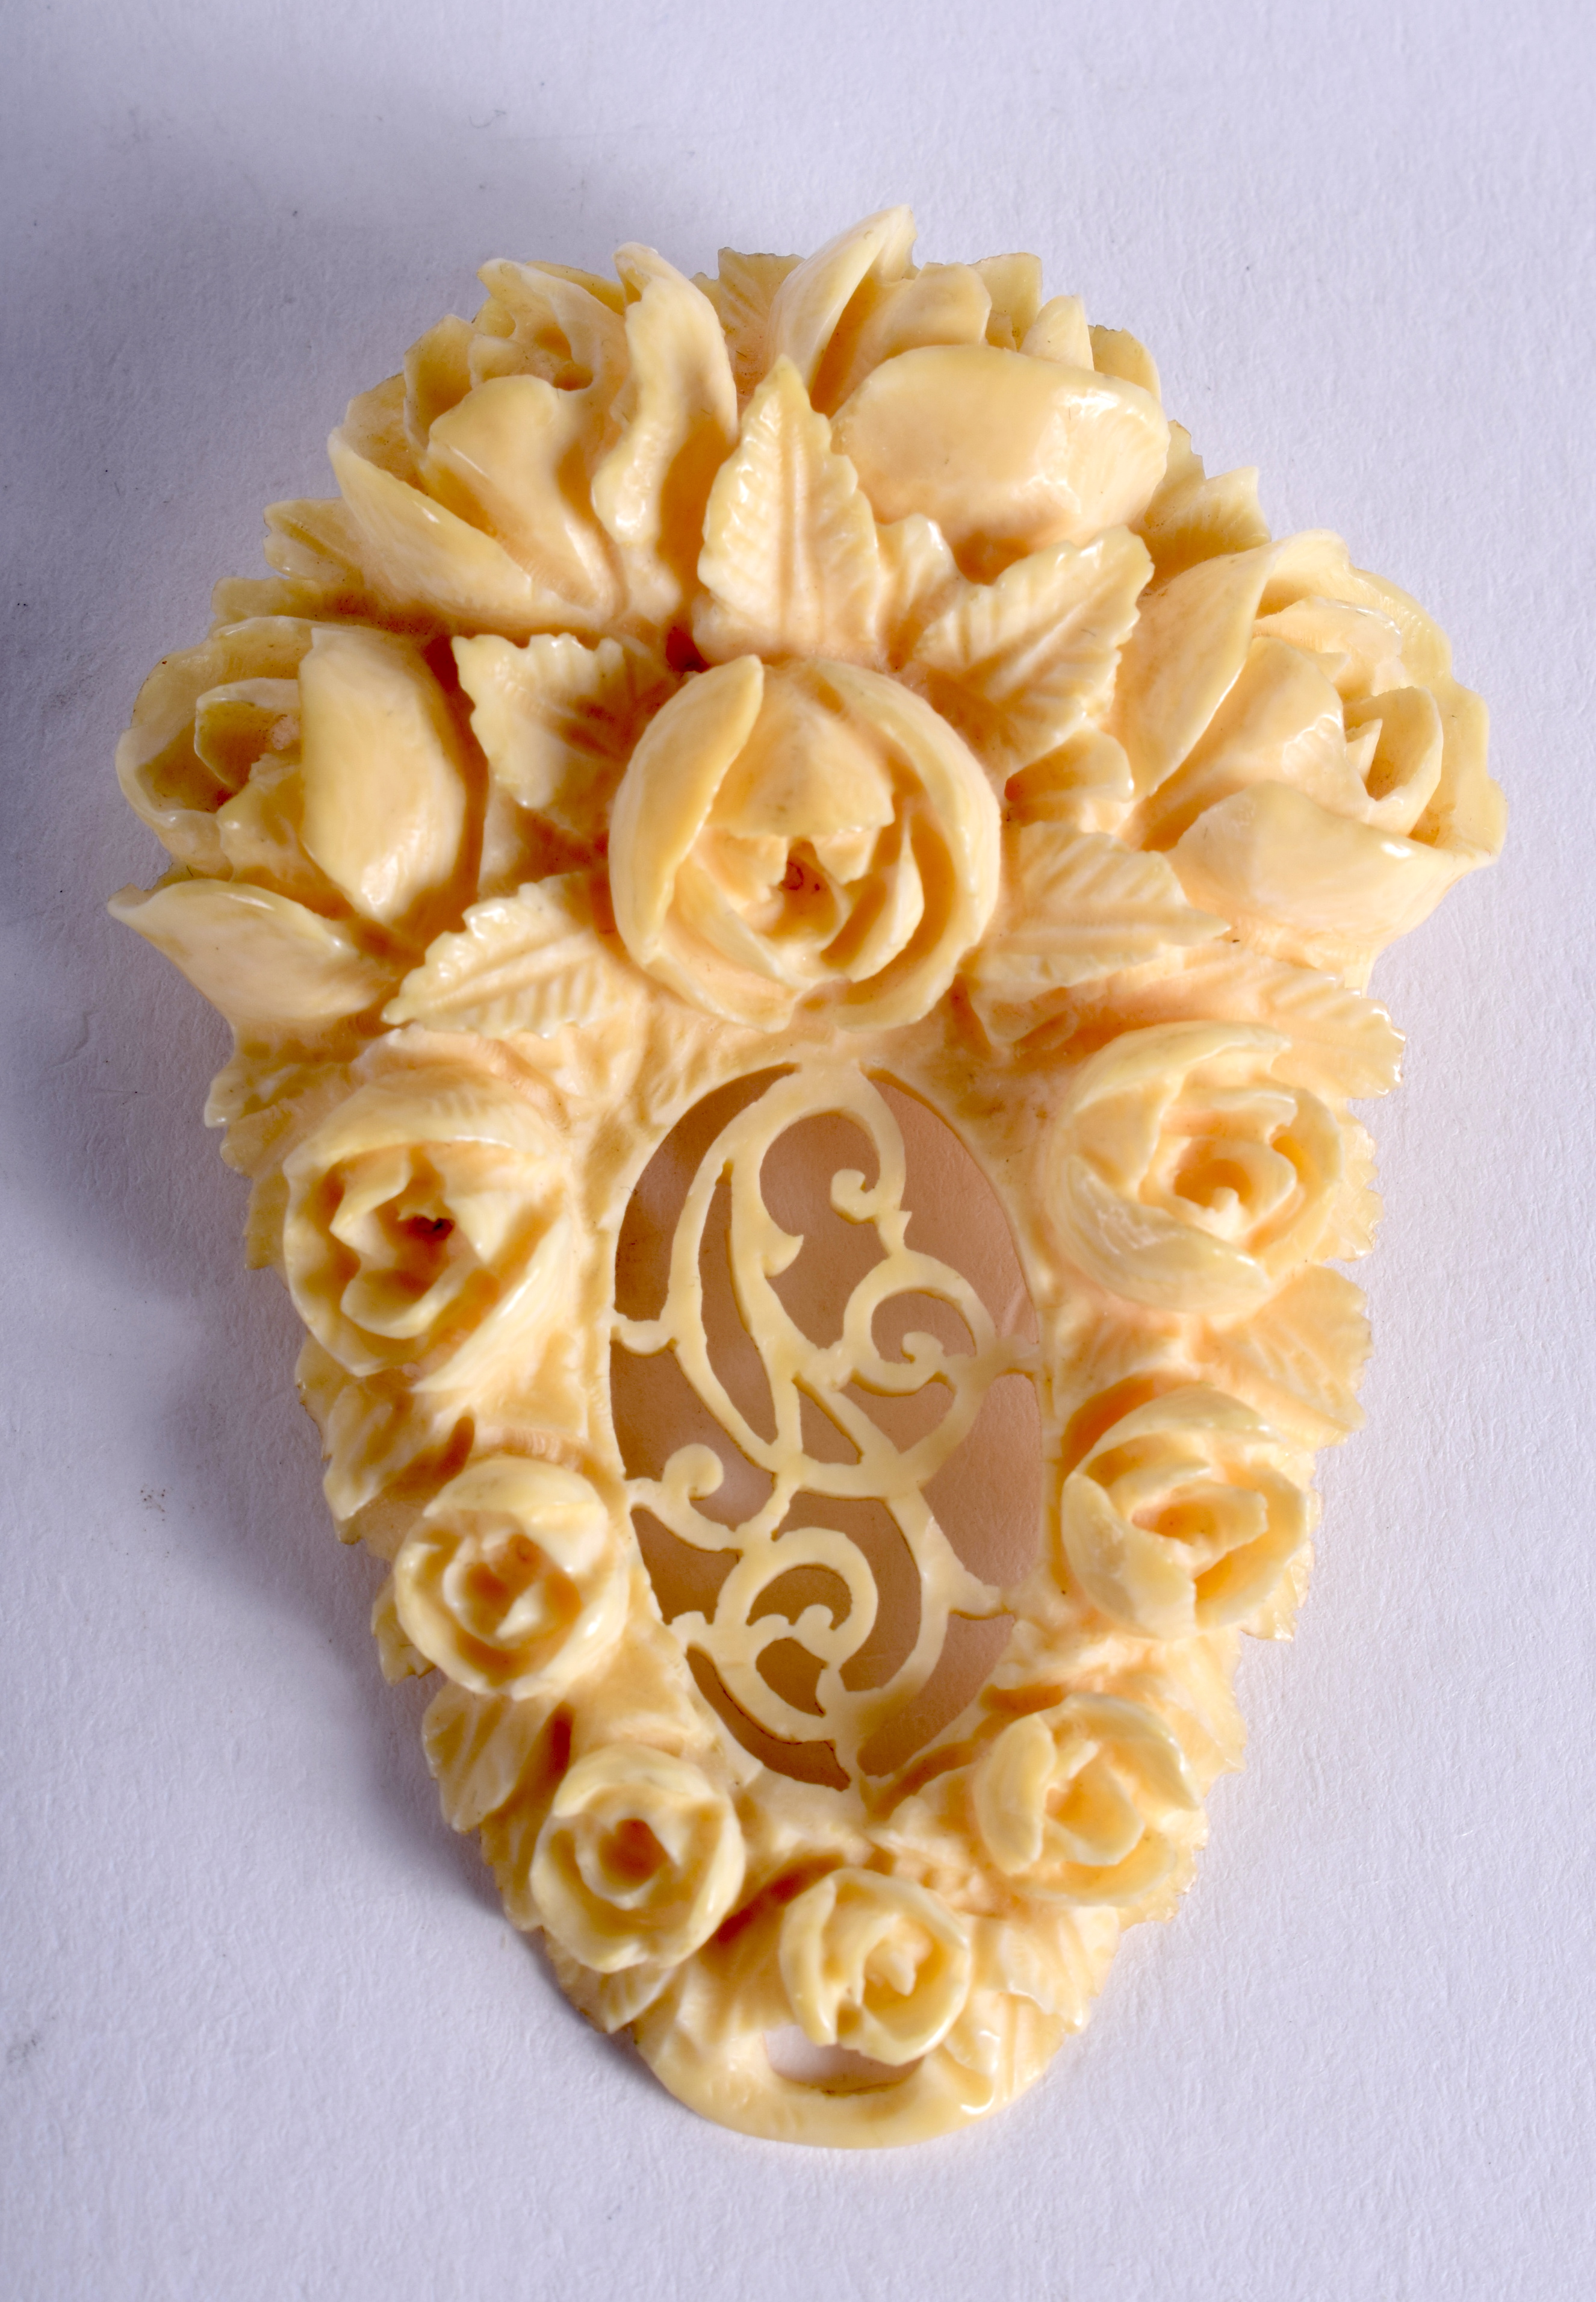 AN ANTIQUE CARVED IVORY BROOCH. 6 cm x 4 cm.